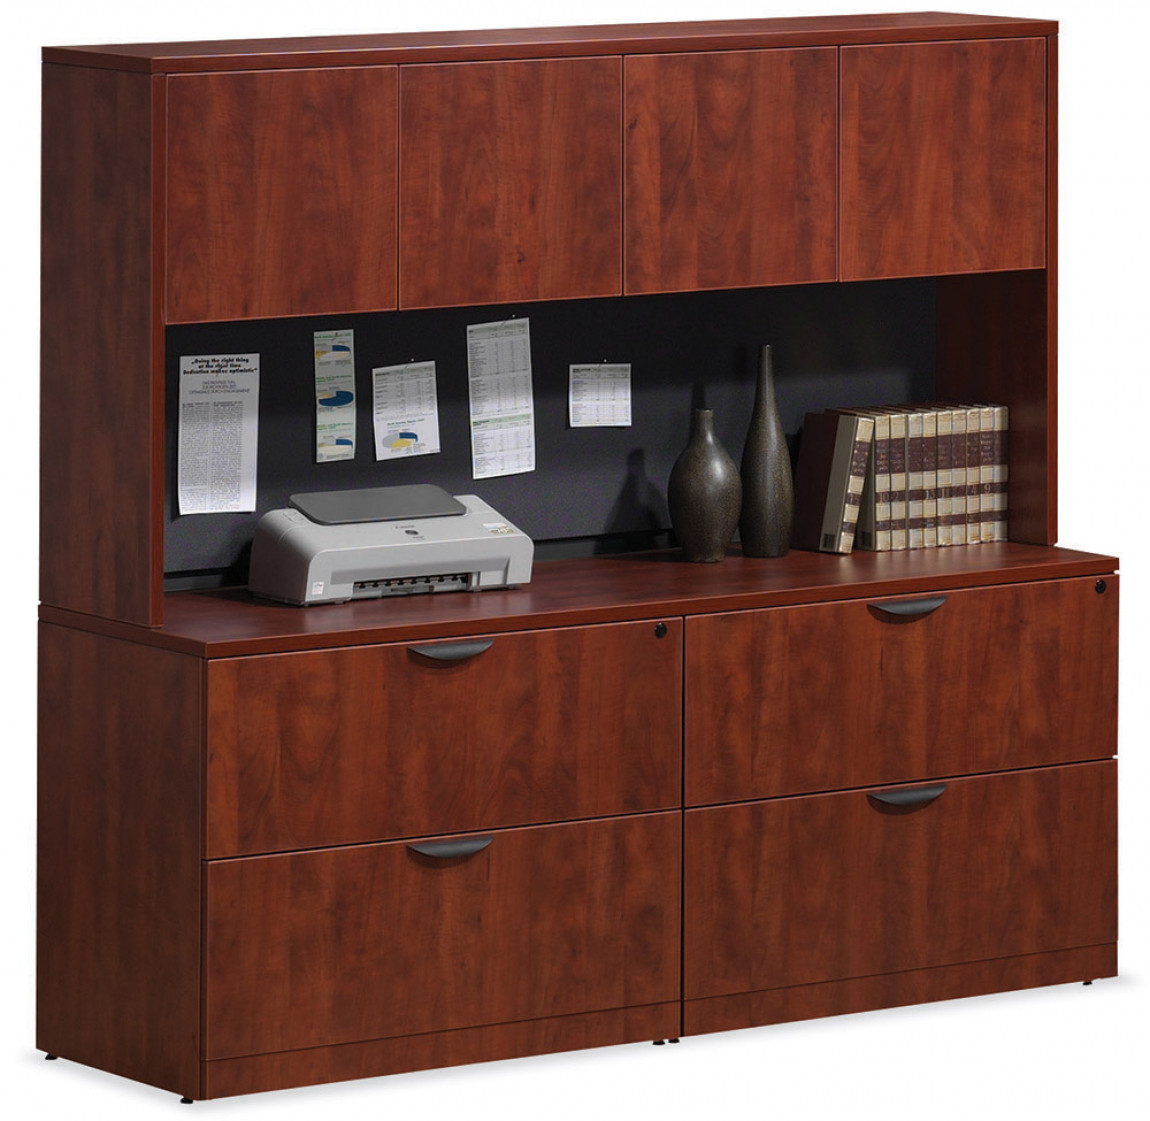 Two Lateral Filing Cabinets w/Four-Door Overhead Hutch - 71"W x 22"D x 44"H (MOSPL999)